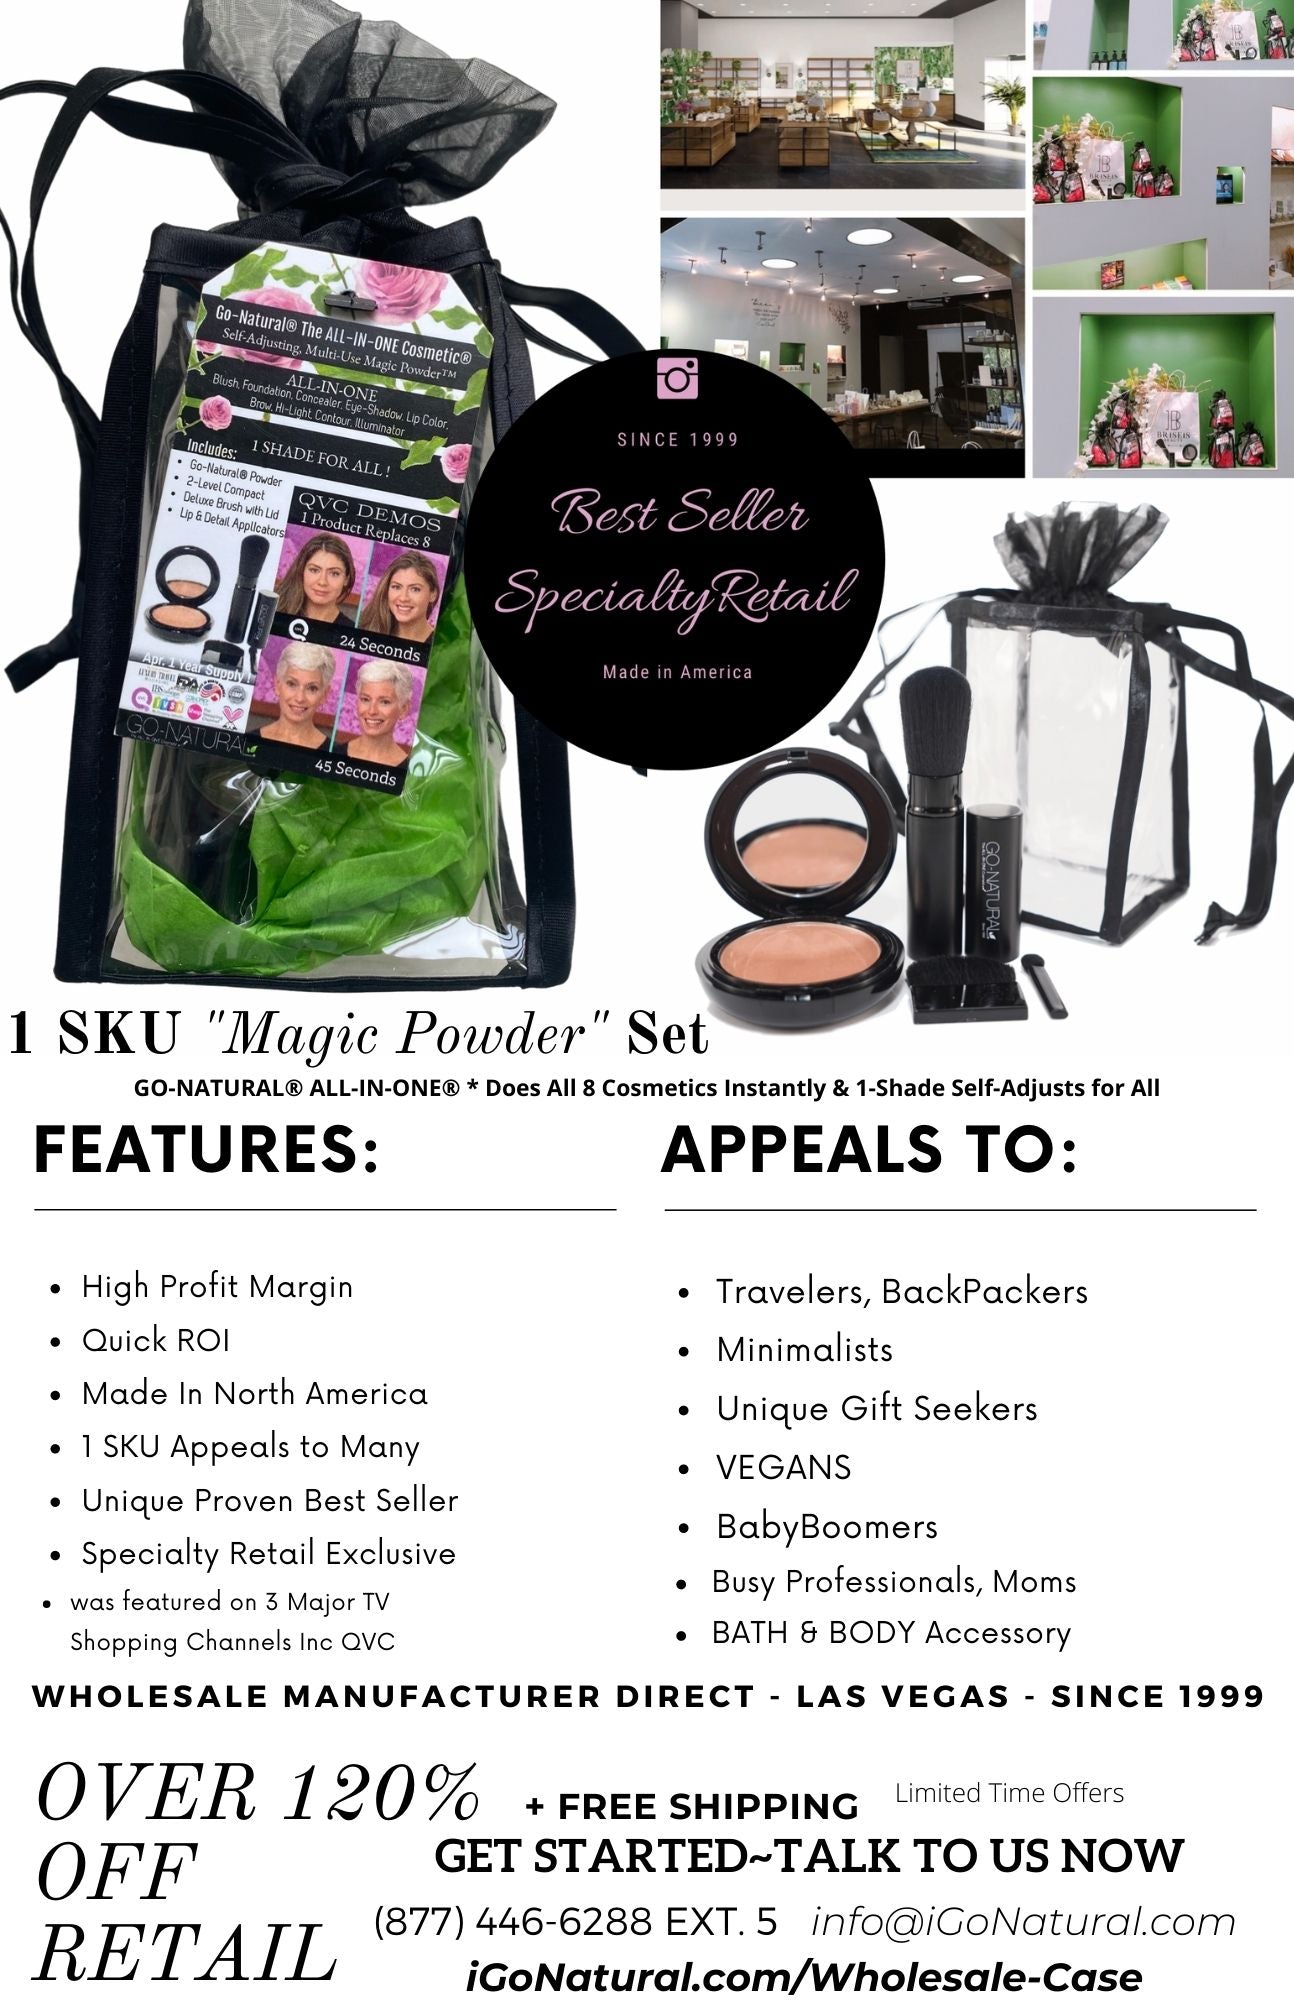 Sample Rep/Retailer Wholesale Evaluation - GO-NATURAL® ALL-IN-ONE® Powder - Travel Gift Set - LARGE